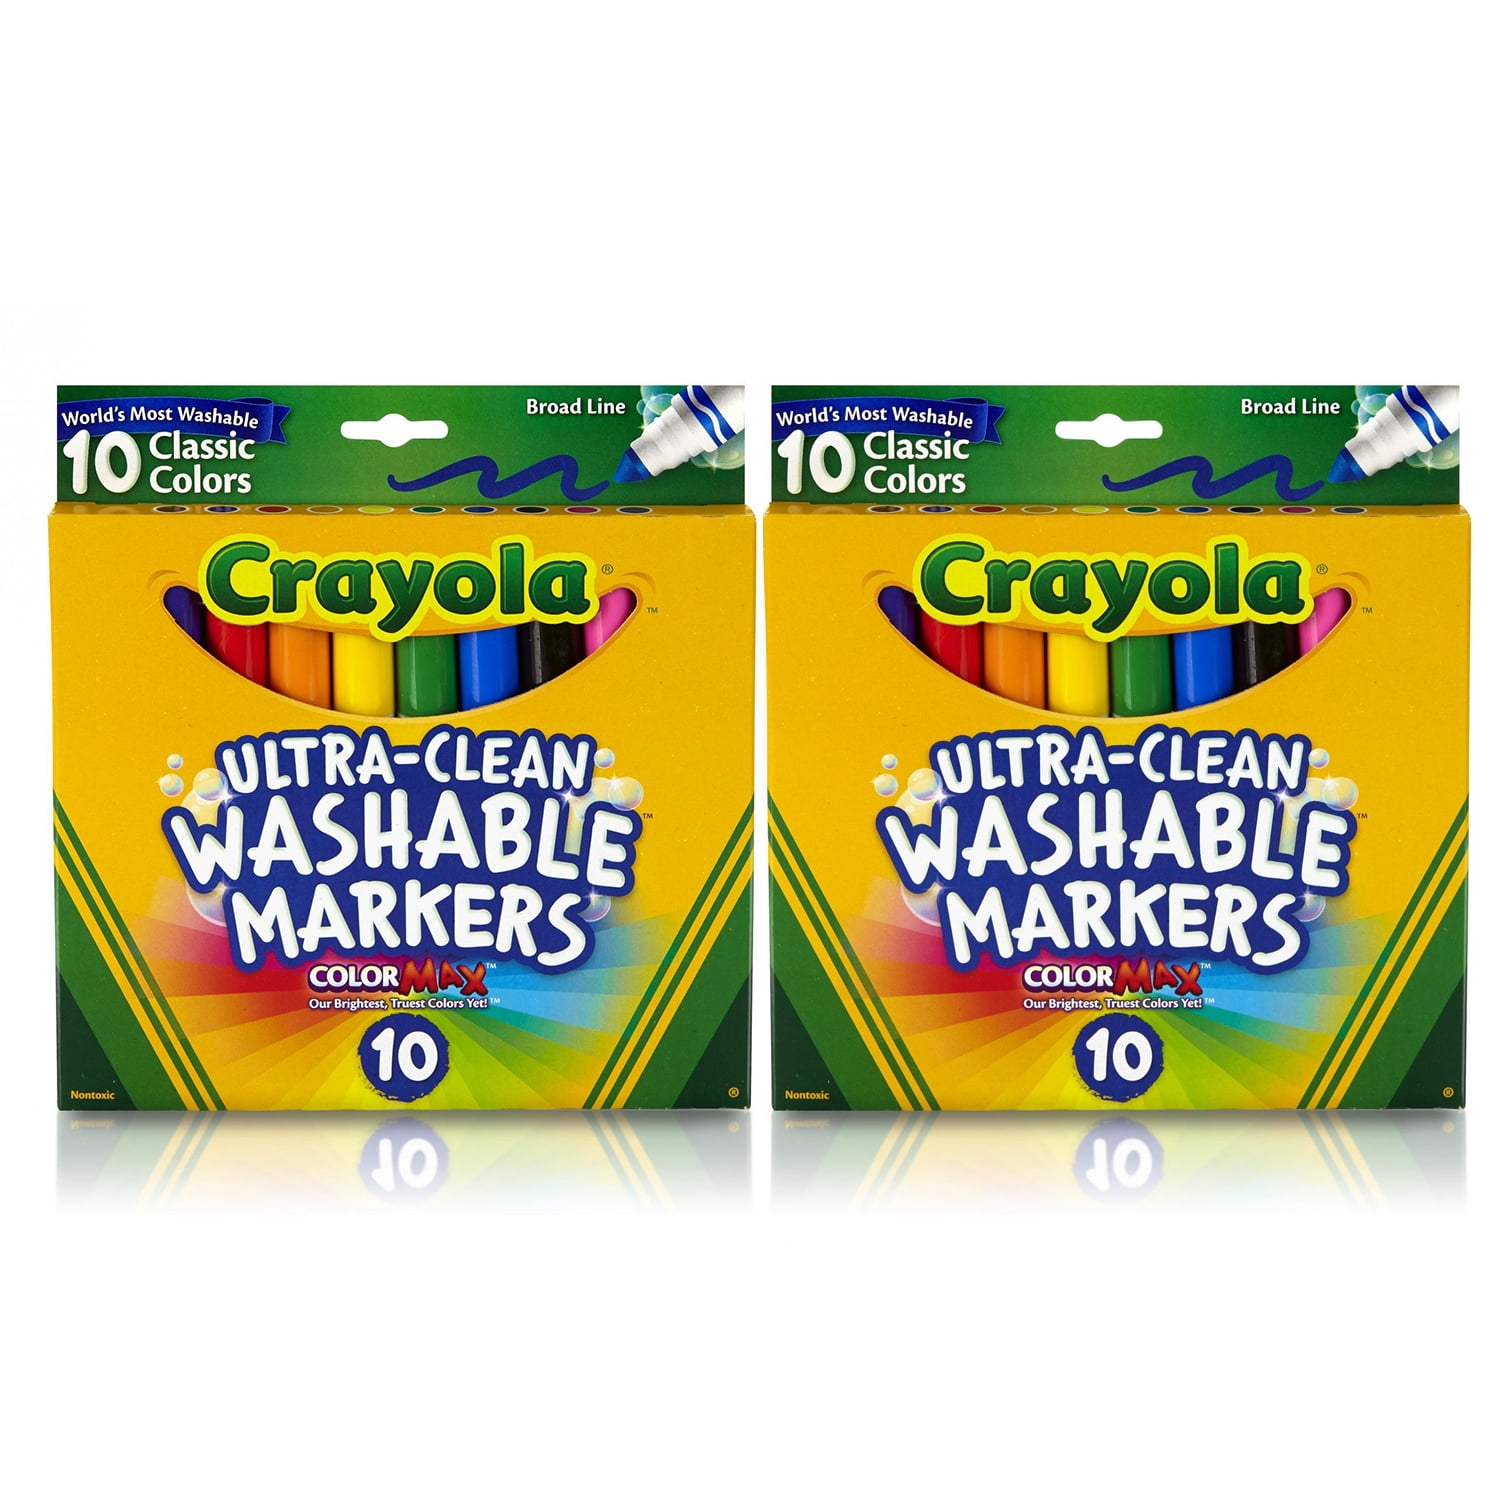 Crayola Ultra-Clean Washable Broad Line Markers, 10 Count - 2 Pack